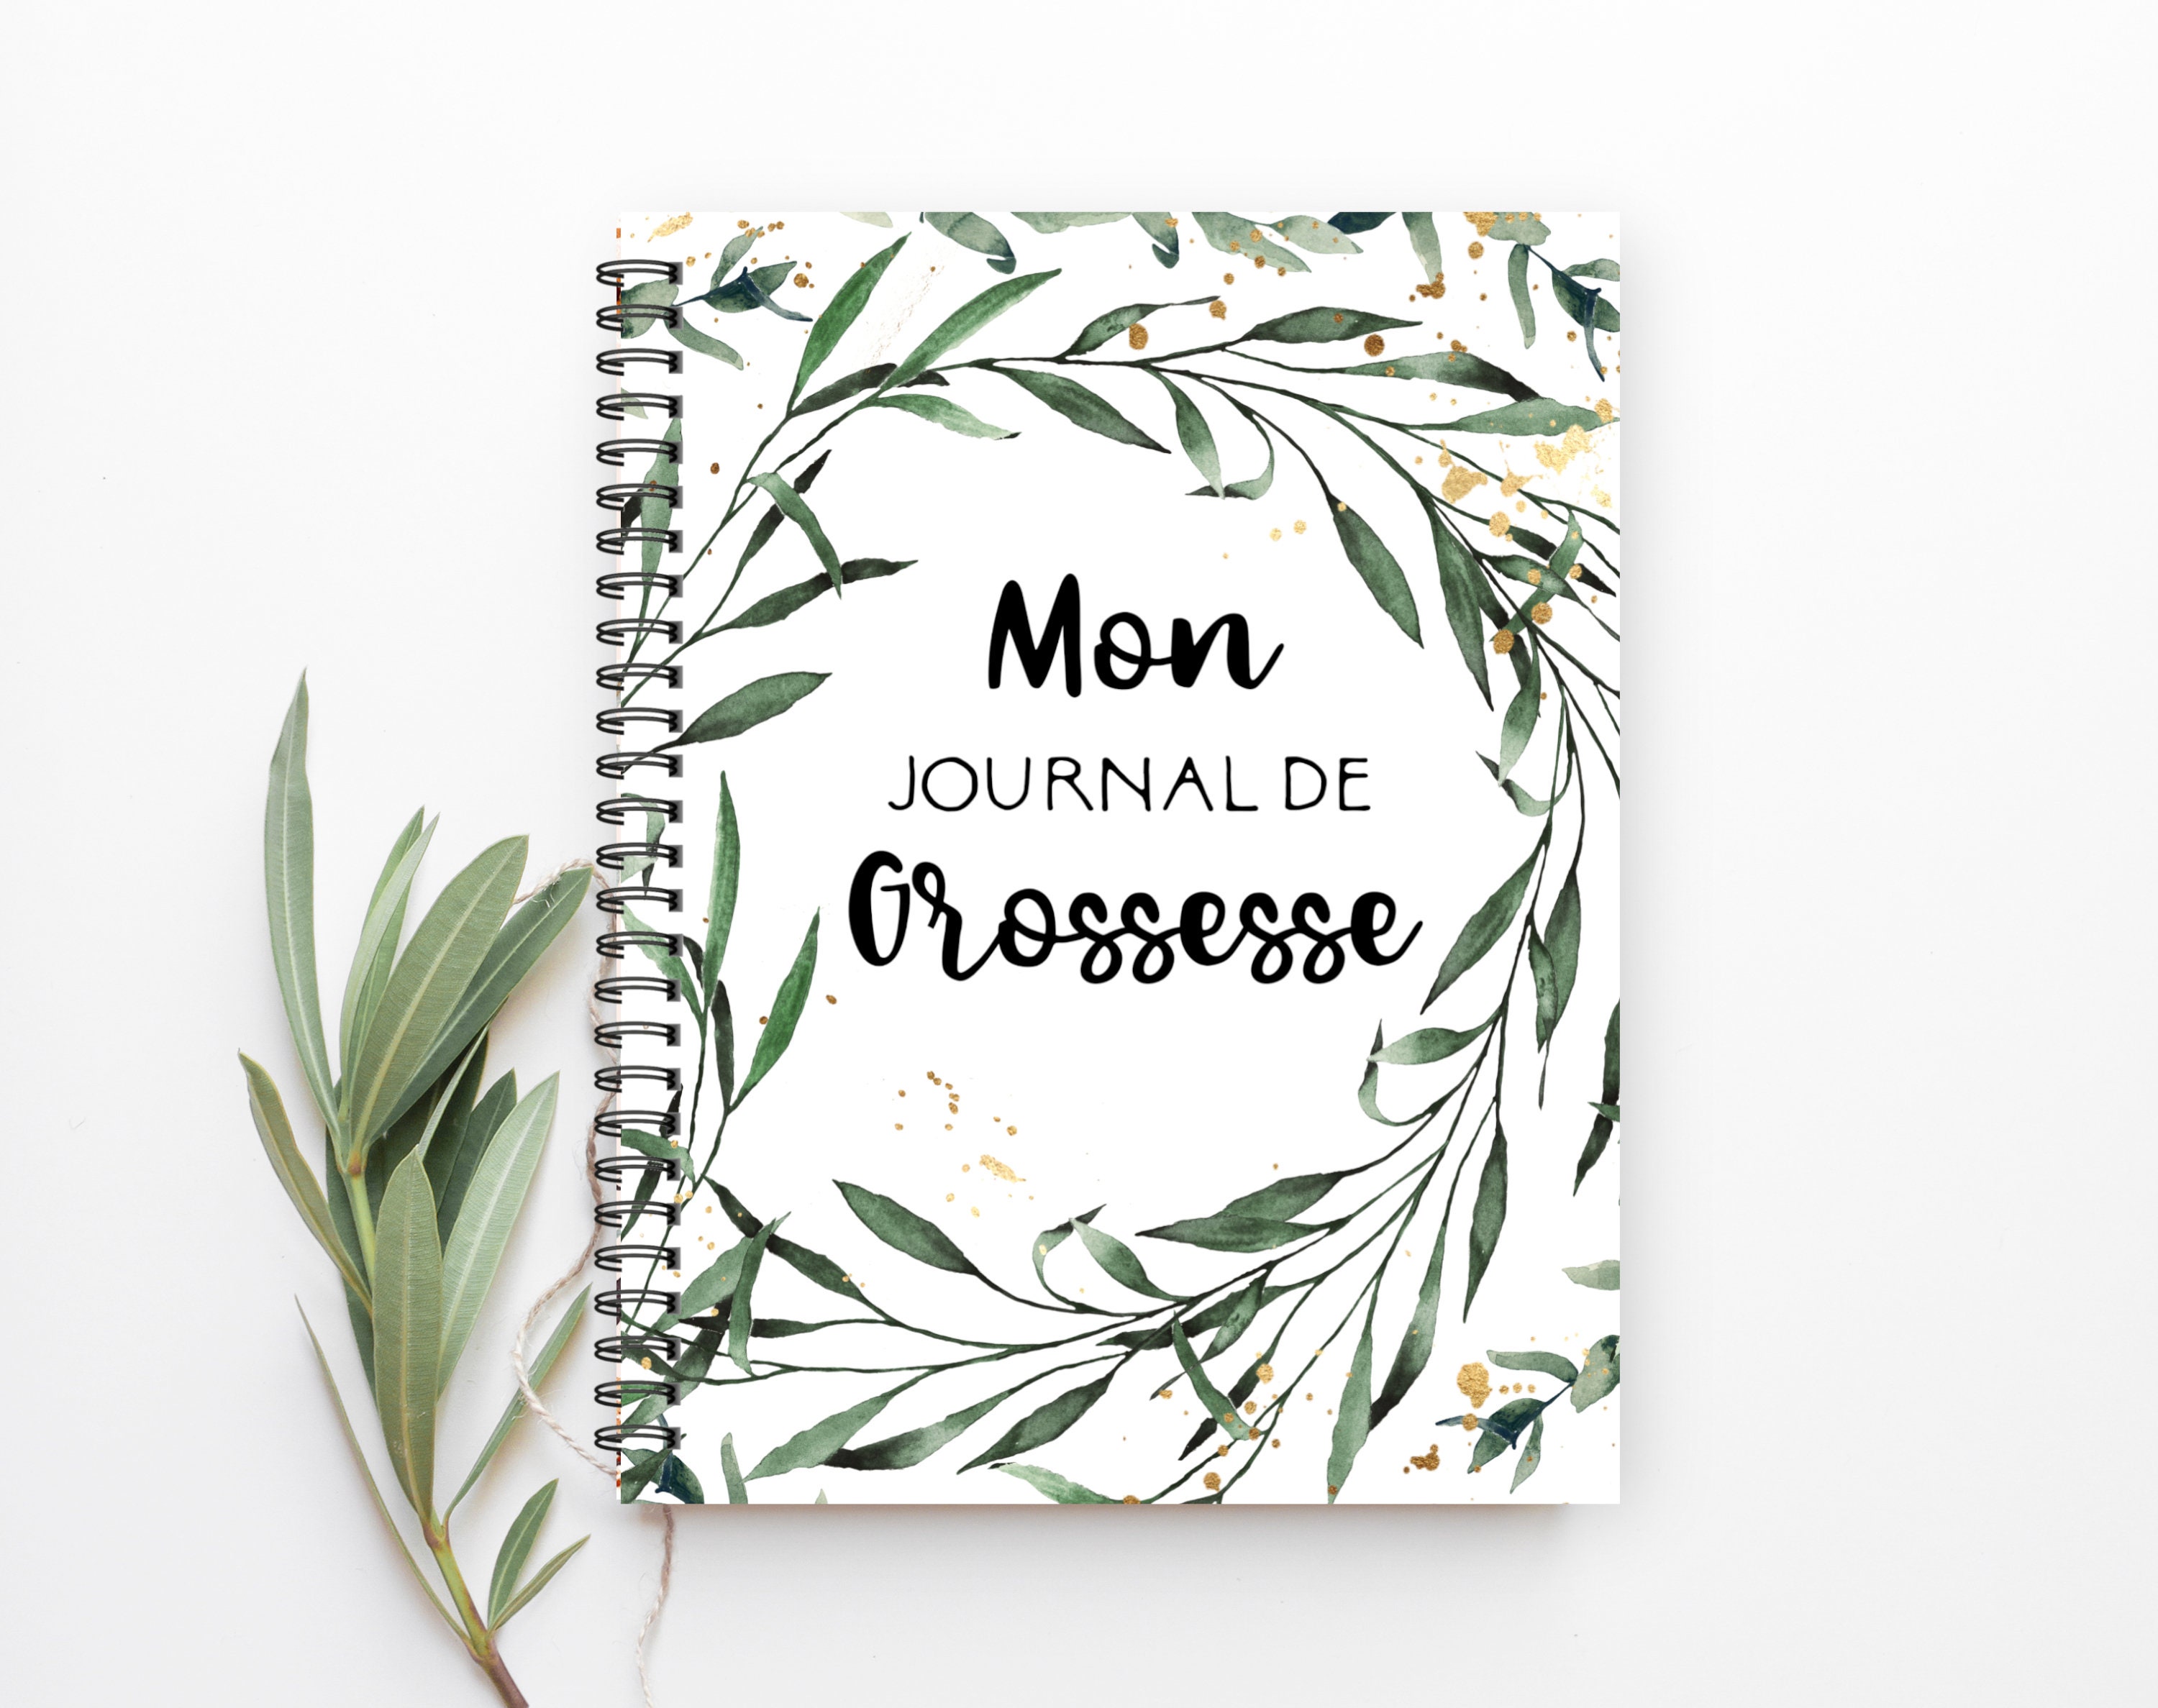 Mon journal de grossesse: MOM TO BE (French Edition)